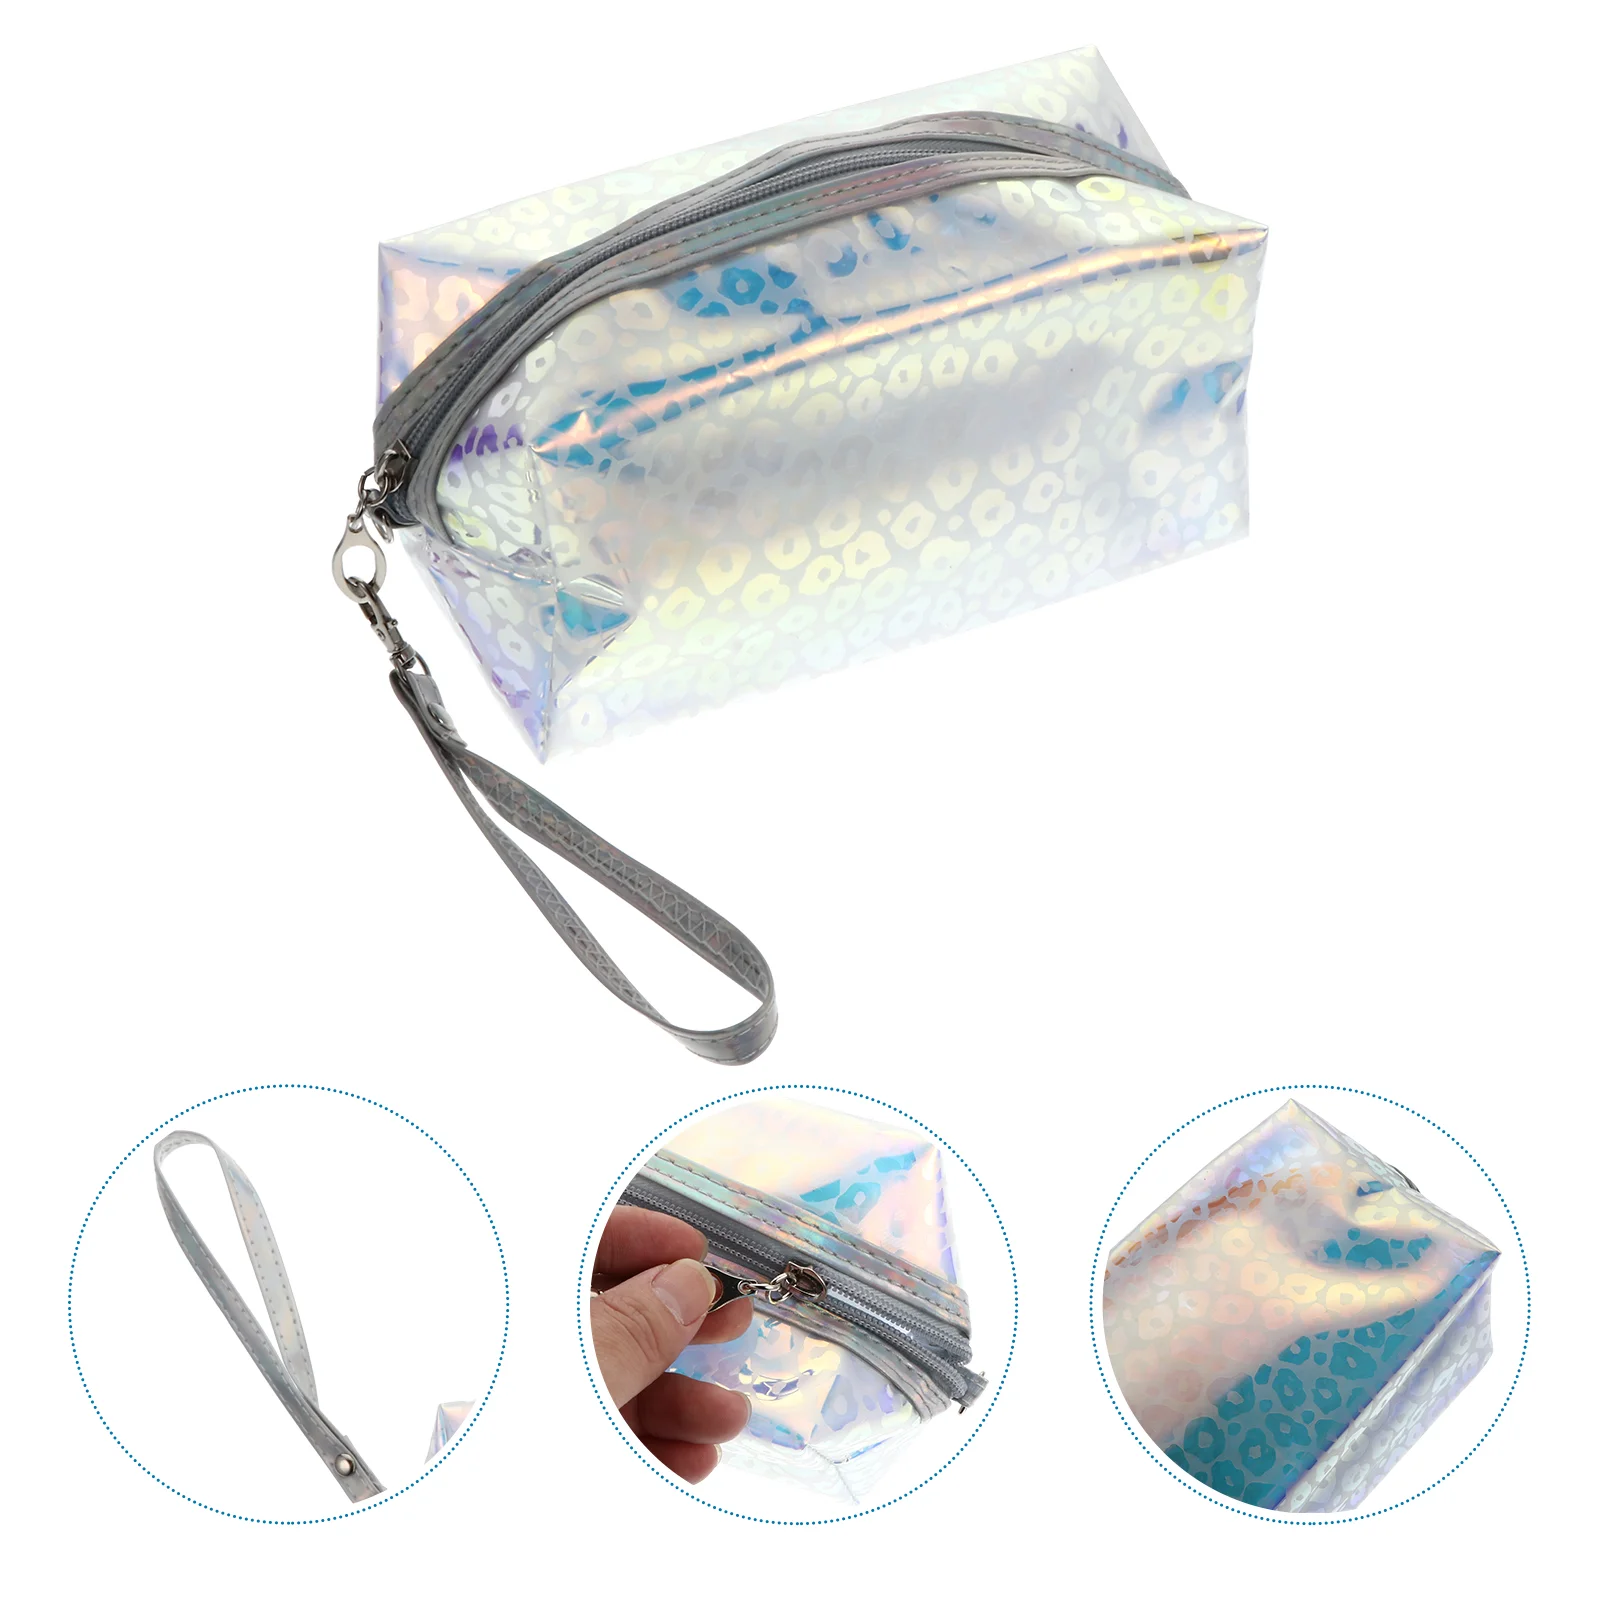 

Toiletry Makeup Travel Storage Pouch Toiletries Portable Wash Container Zipper Tool Washing Hand Held Case Make Up Carry Handbag